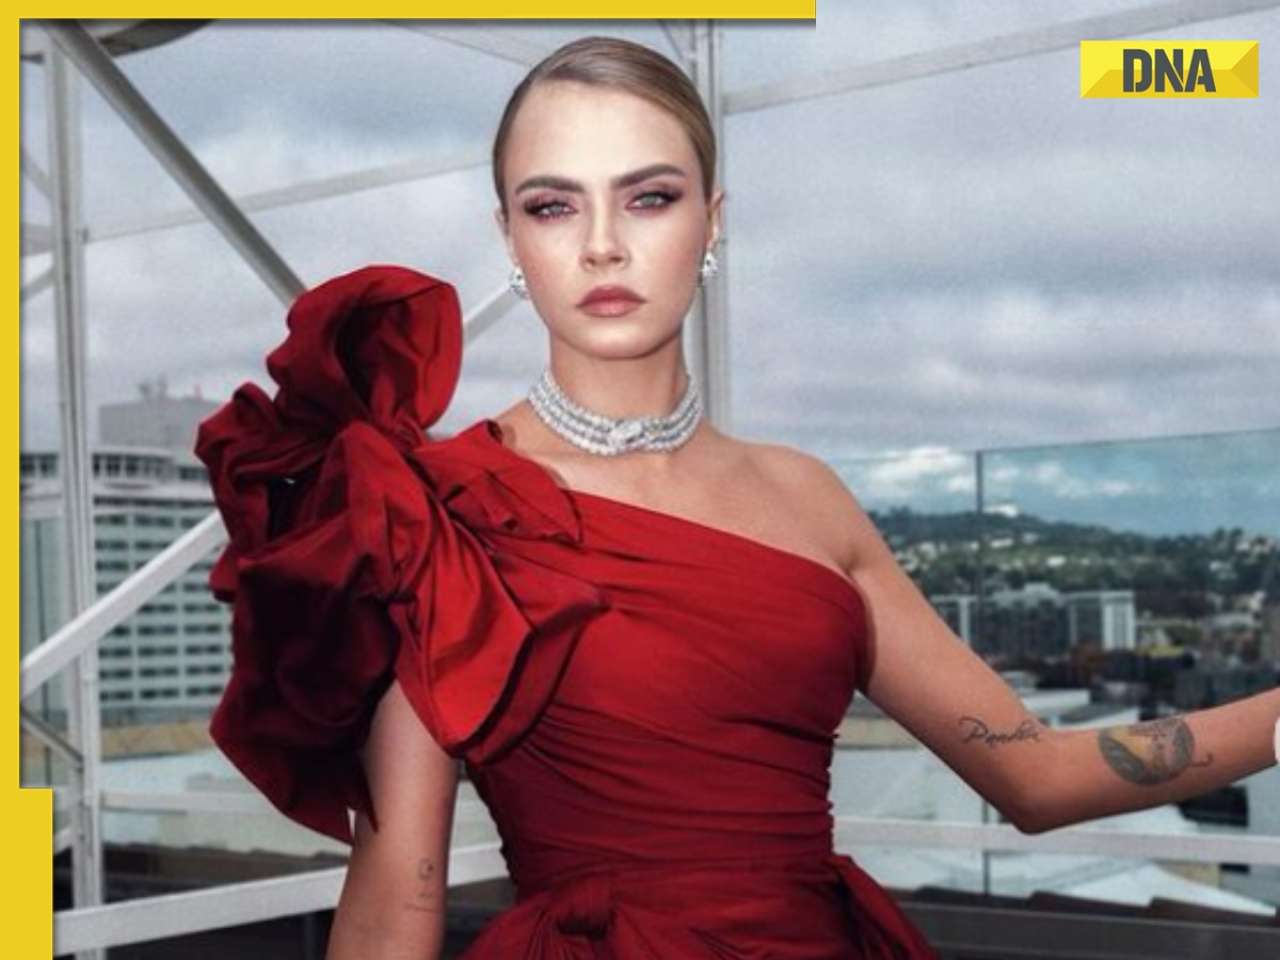 Cara Delevingne's Rs 58 Crore LA home destroyed in massive fire, two firefighters injured